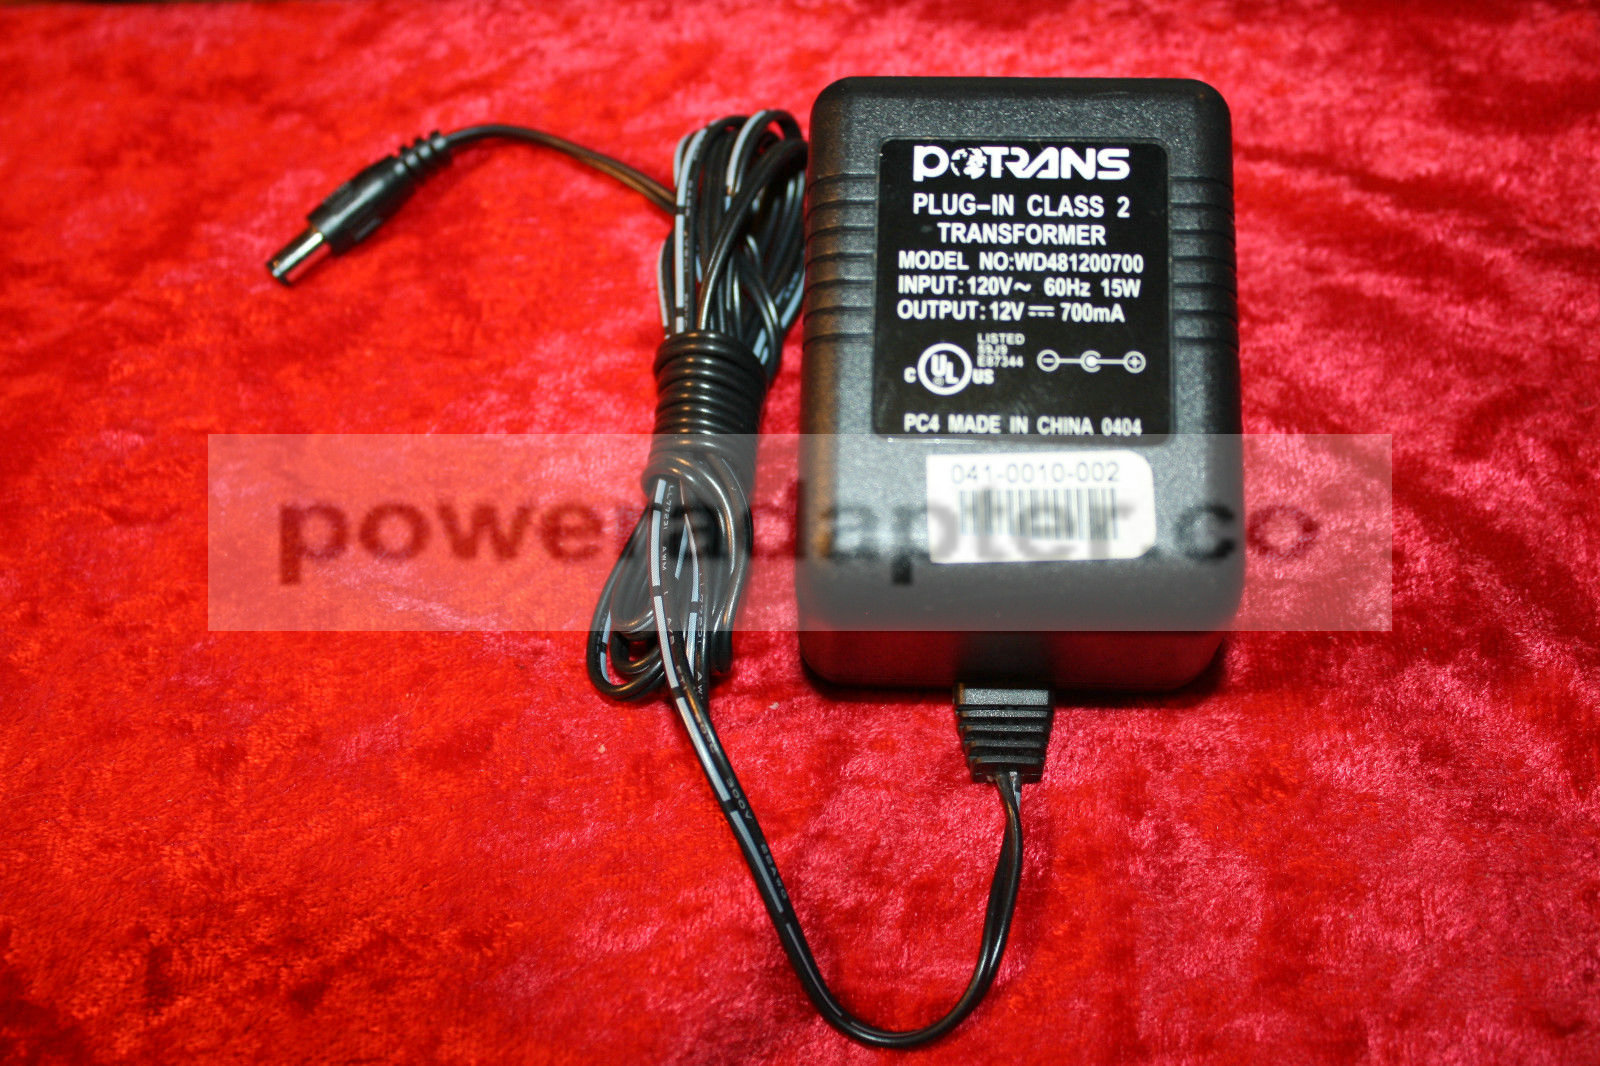 Potrans WD481200700 AC Adapter 12V 700mA - Fully Tested! Condition: Used: An item that has been used previously. The